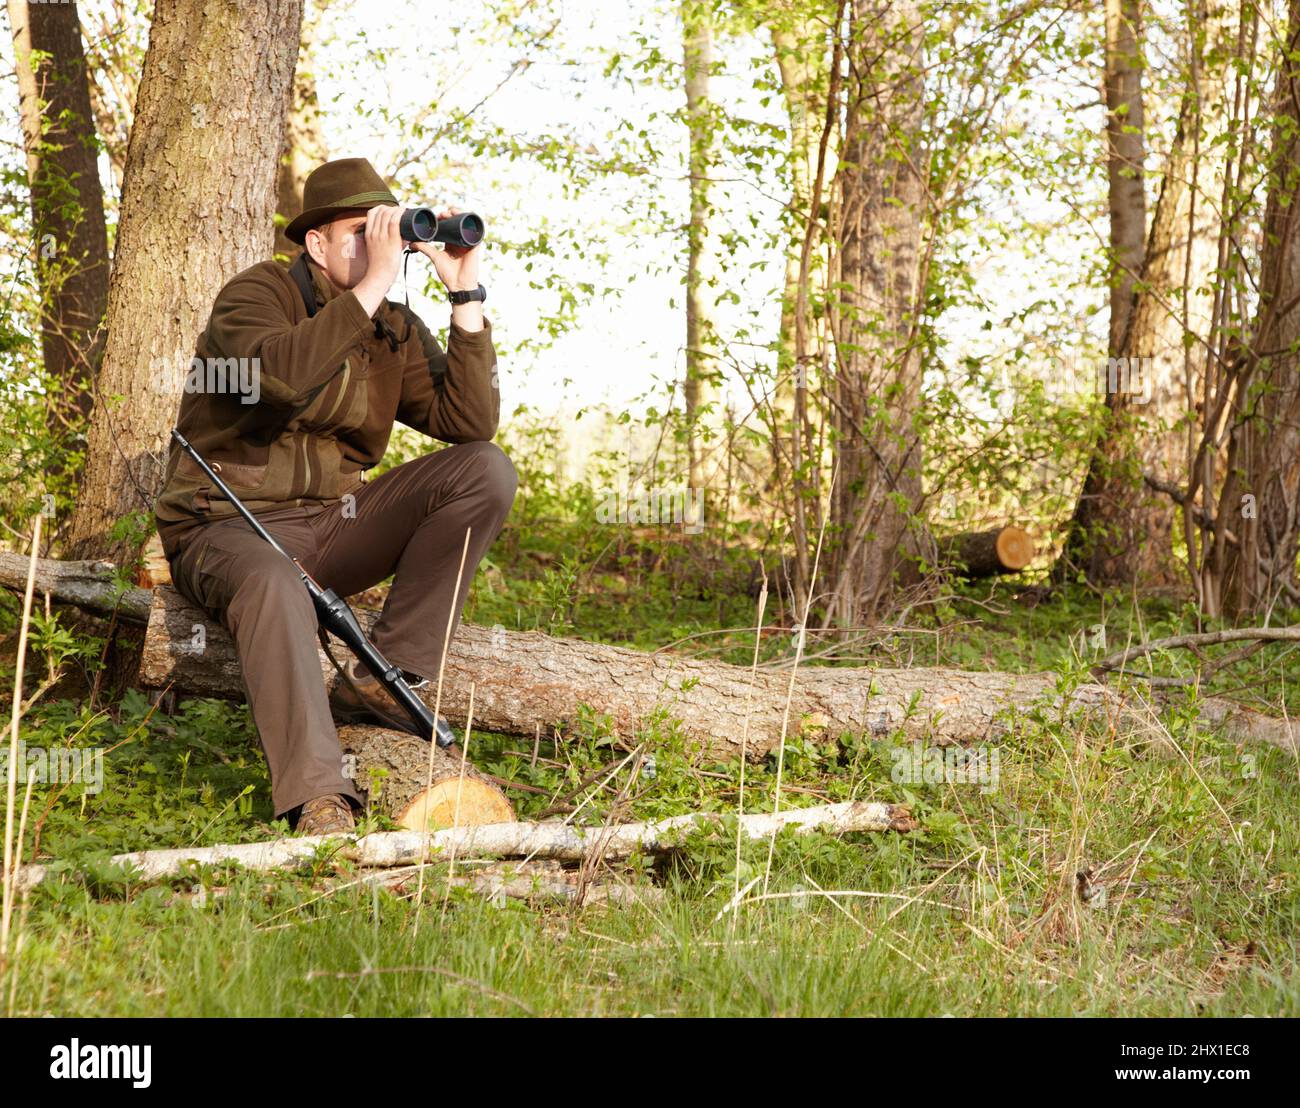 Wildlife hunting requires patience. A game ranger looking through his binoculars while sitting on a log. Stock Photo